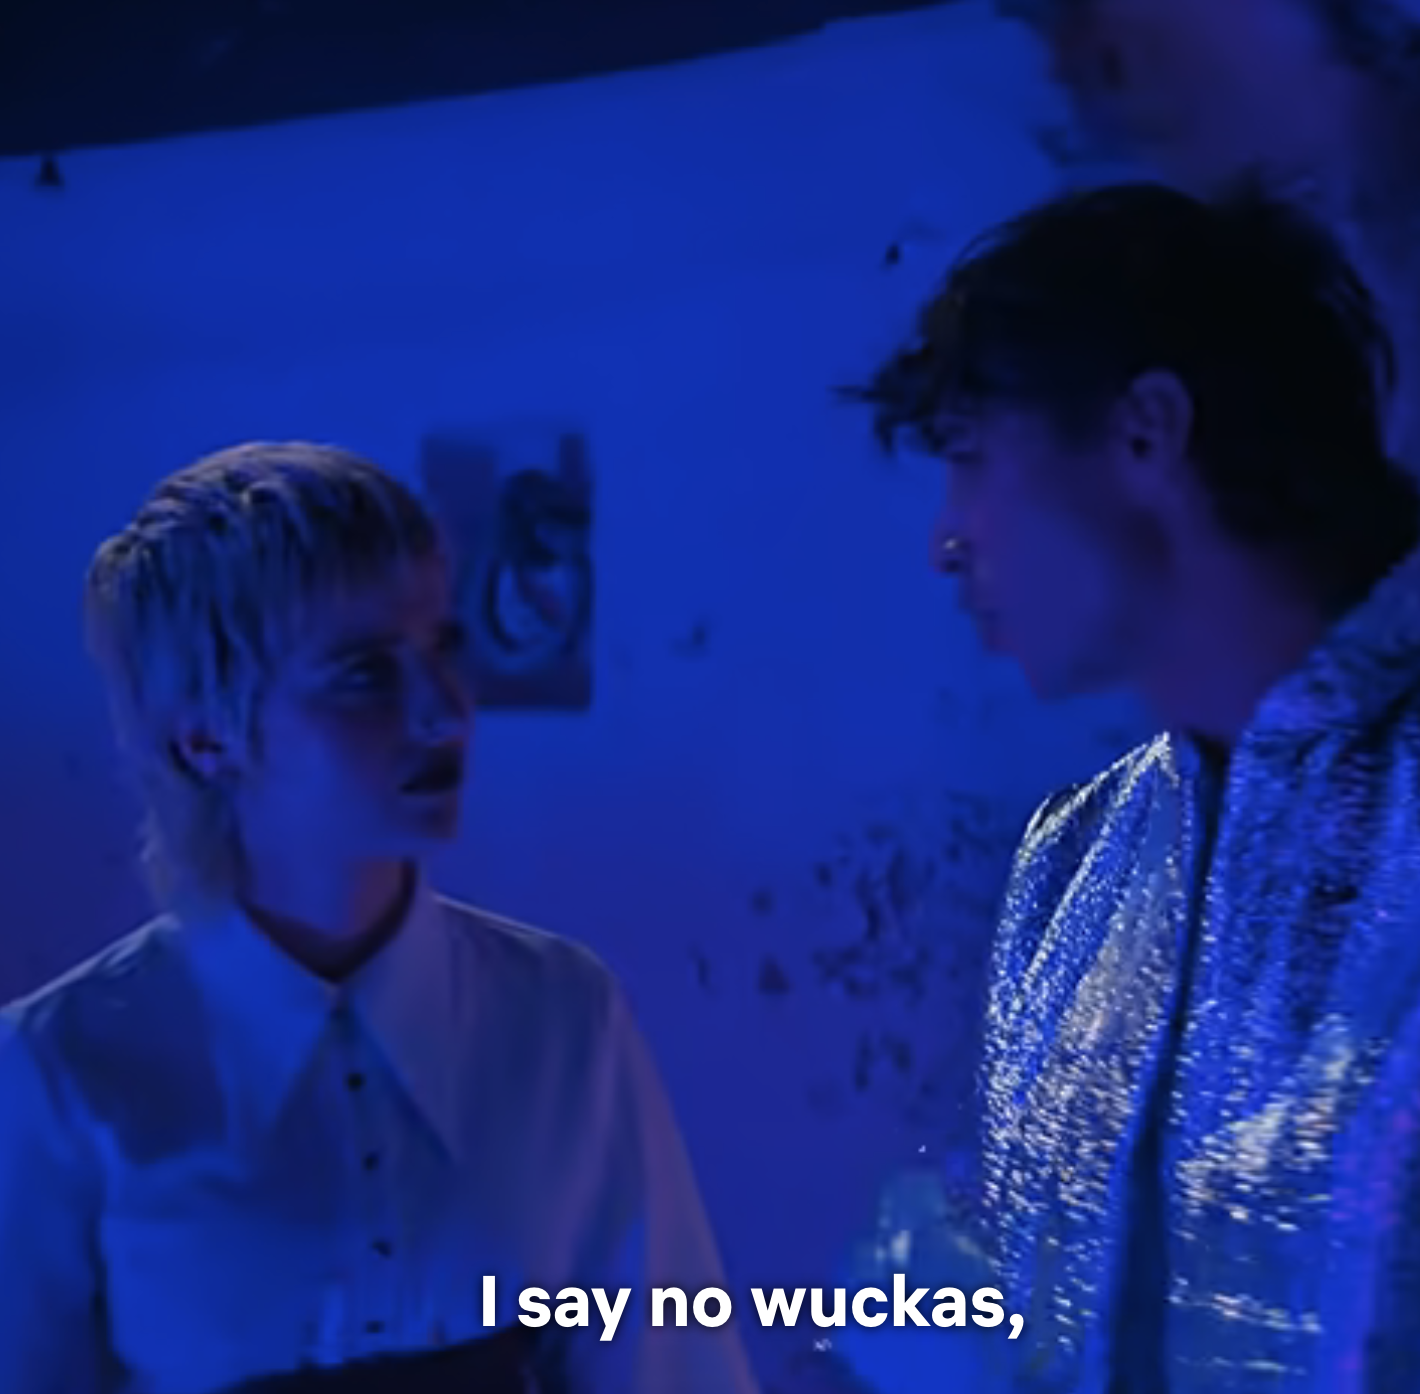 Two individuals in conversation under blue lighting with subtitle text &quot;I say no wuckas,&quot;